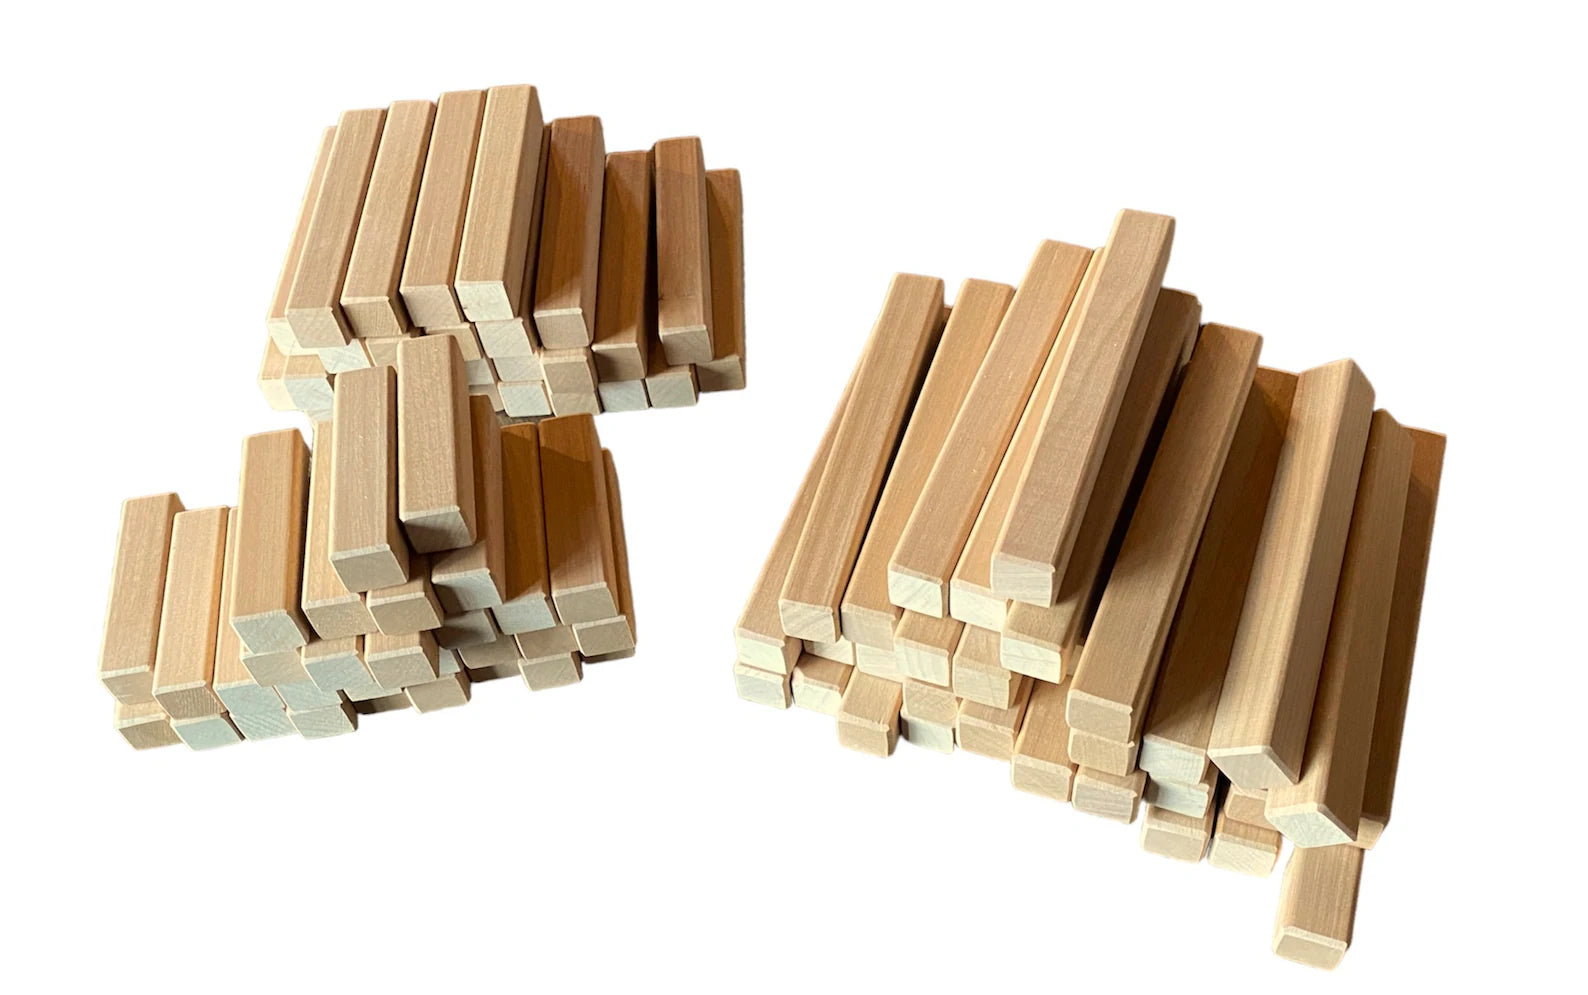 106 Piece Natural Wood Toy Building Blocks